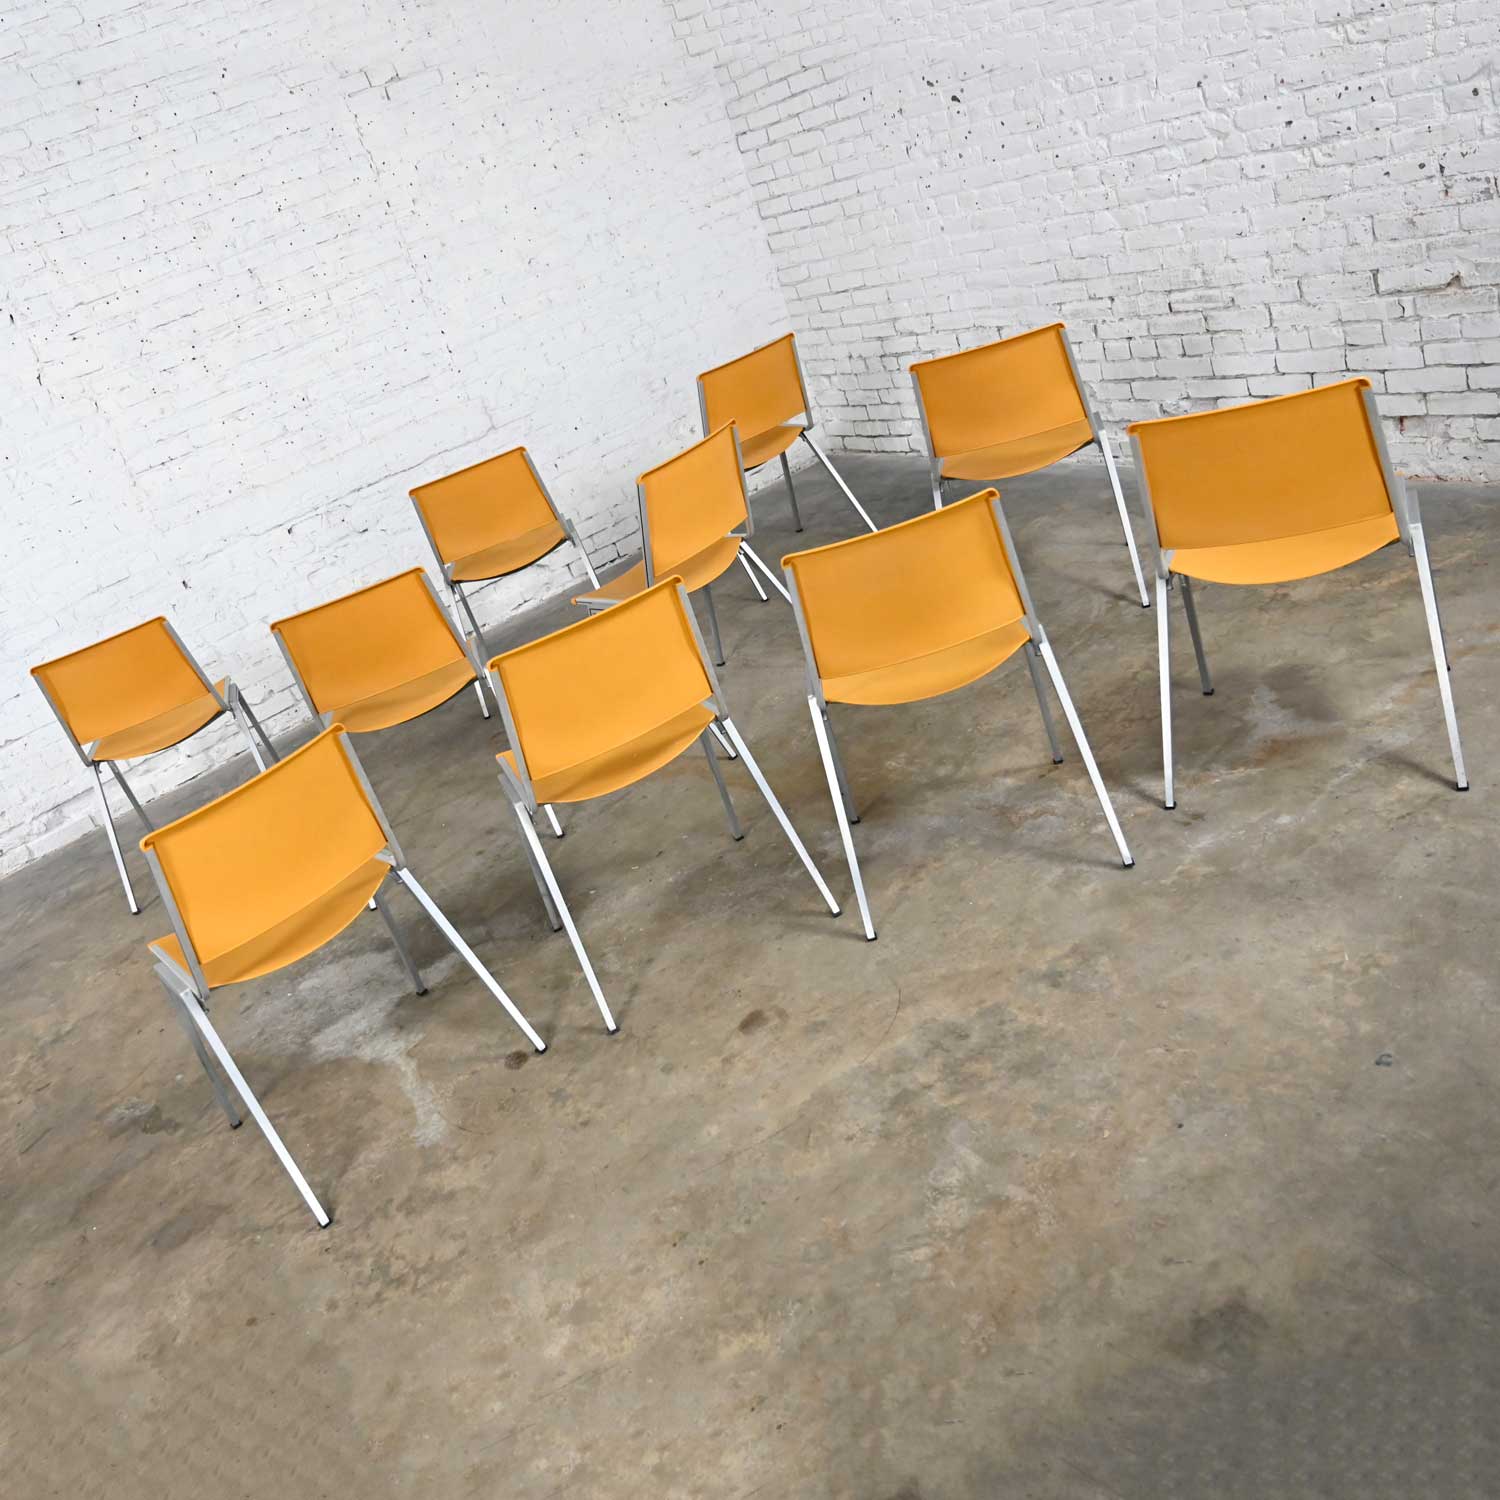 Vintage Aluminum Steelcase Stacking Chairs Model #1278 Yellow Gold Plastic Set of 10